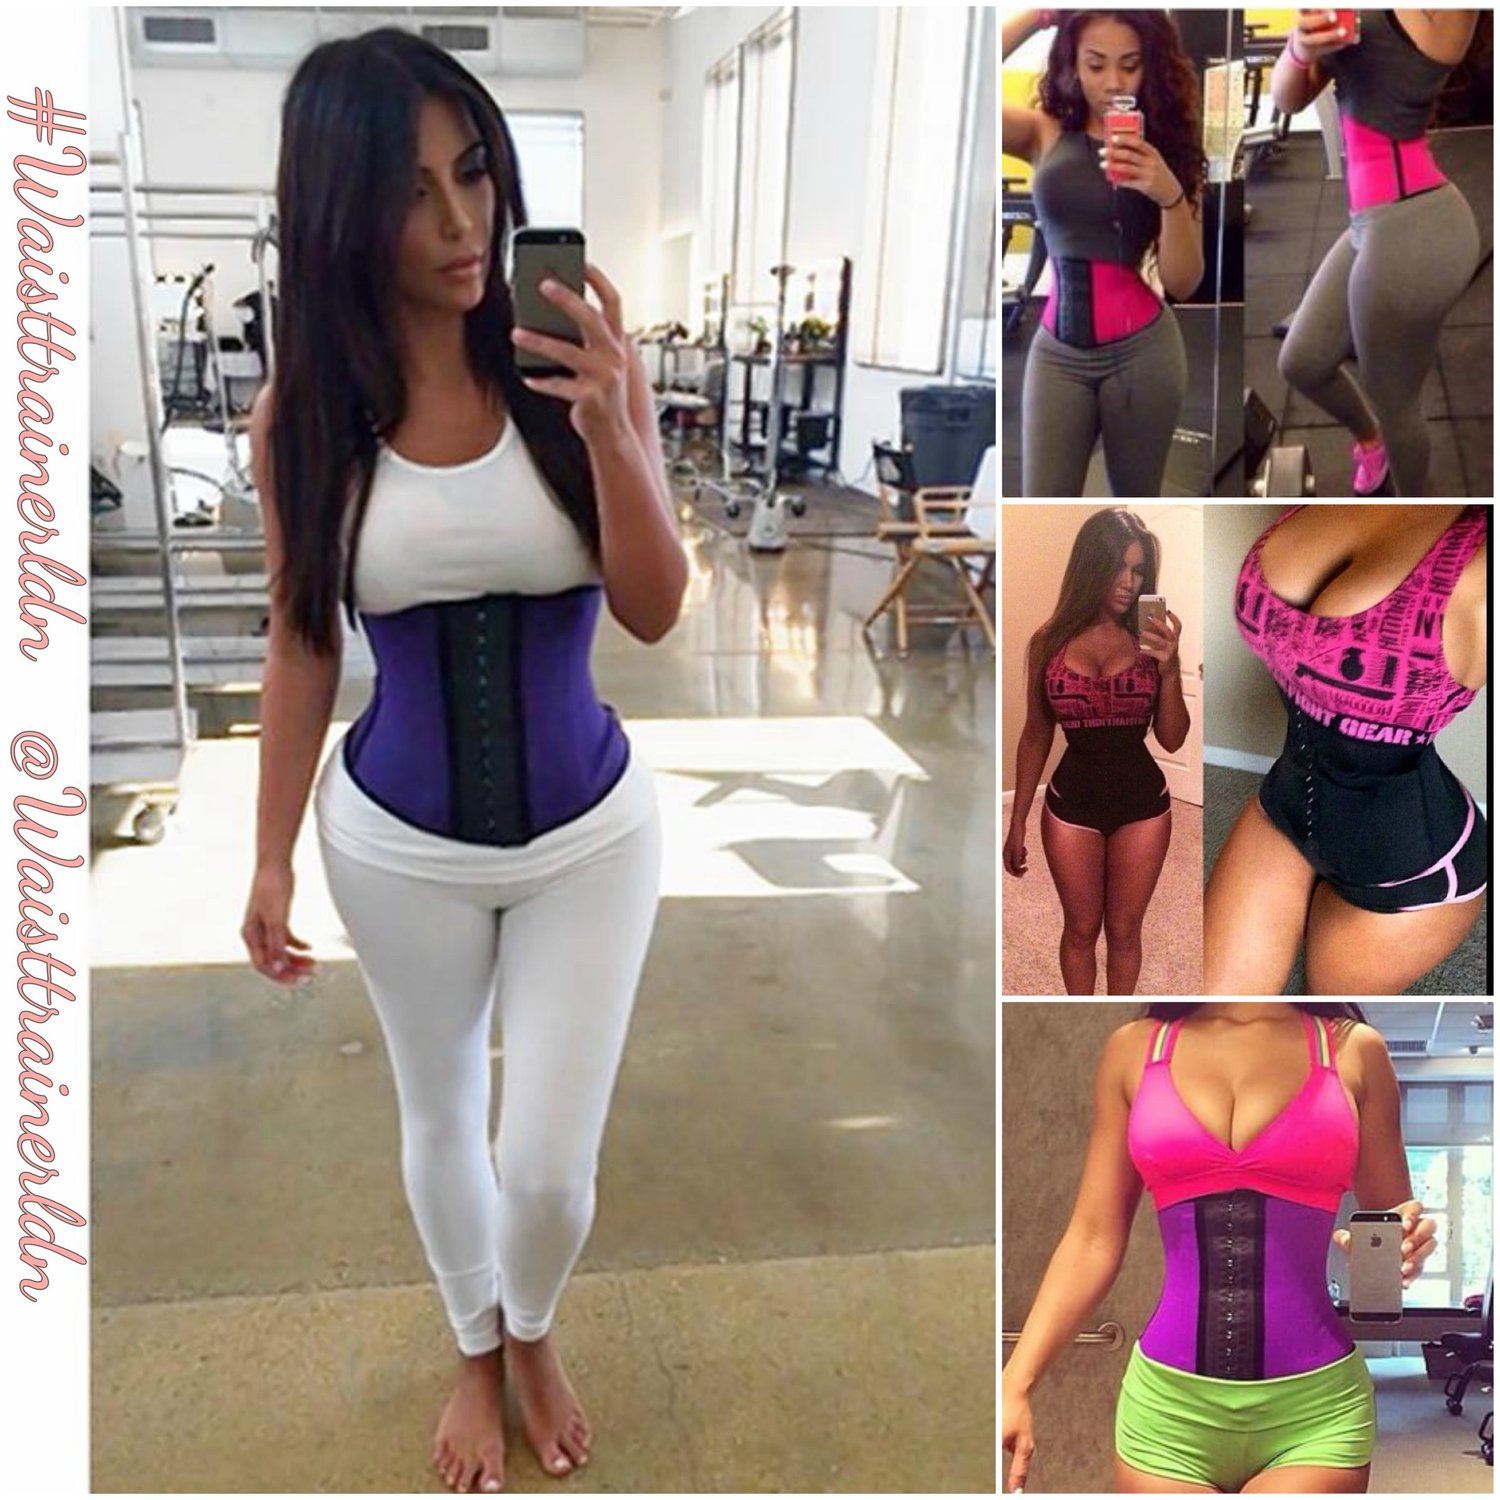 Waist Trainer LDN - Where thick girls are made — 'The fashionista